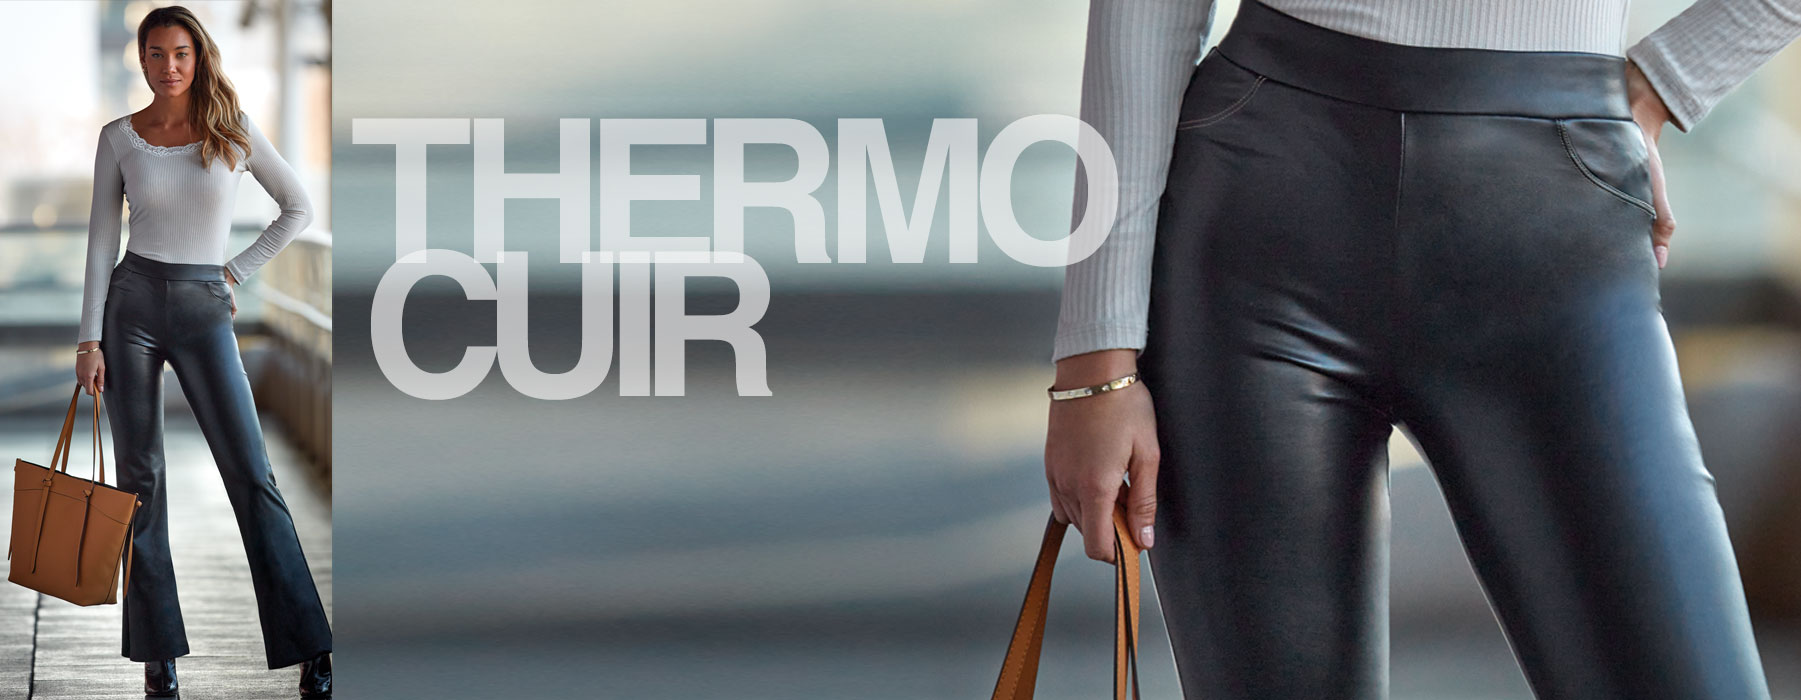 THERMO CUIR 3D